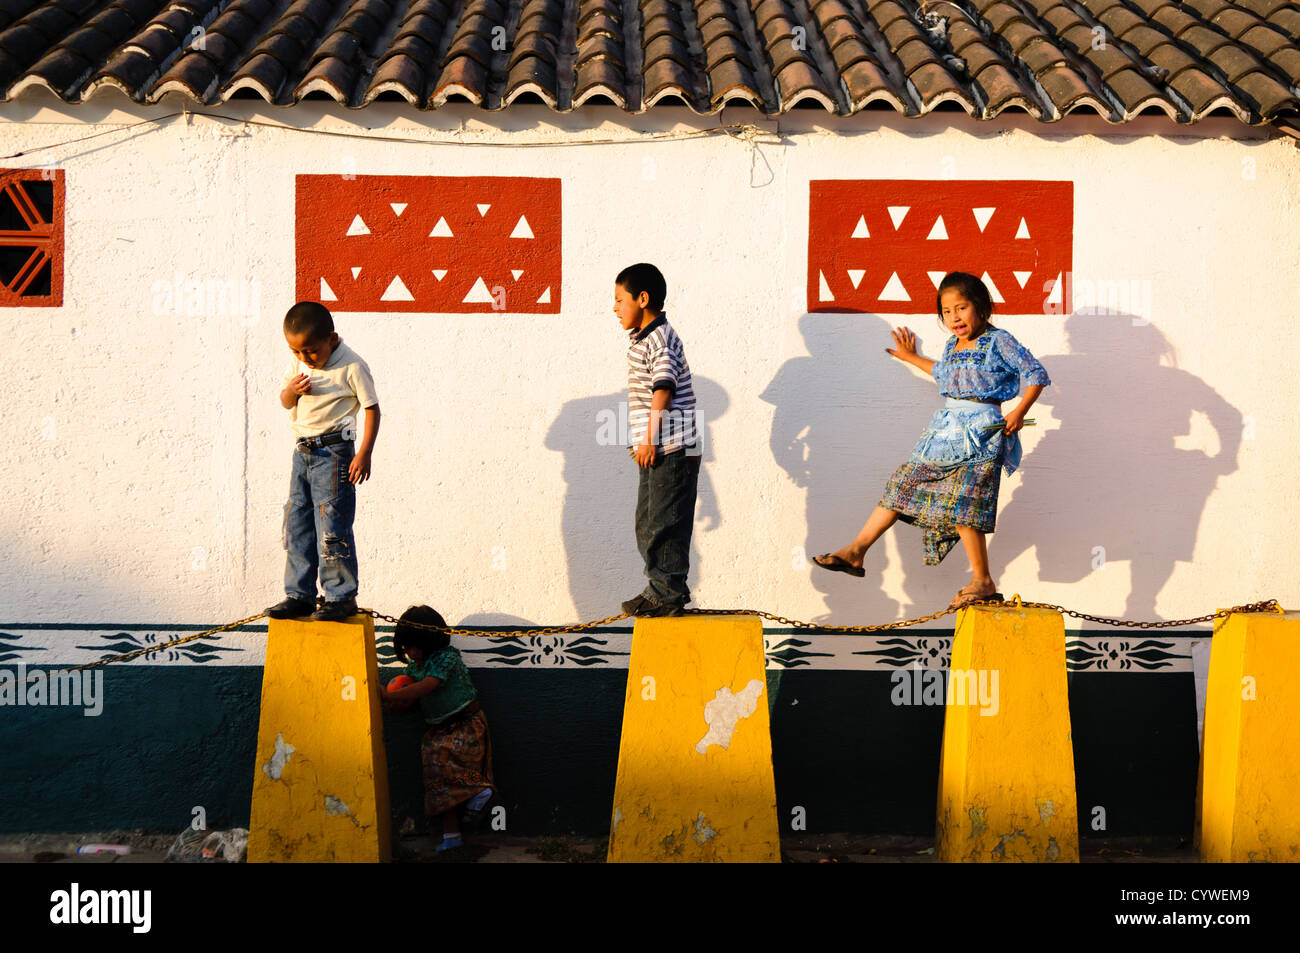 Guatemalan children playing. Famous for its well-preserved Spanish baroque architecture as well as a number of ruins from earthquakes, Antigua Guatemala is a UNESCO World Heritage Site and former capital of Guatemala. Stock Photo